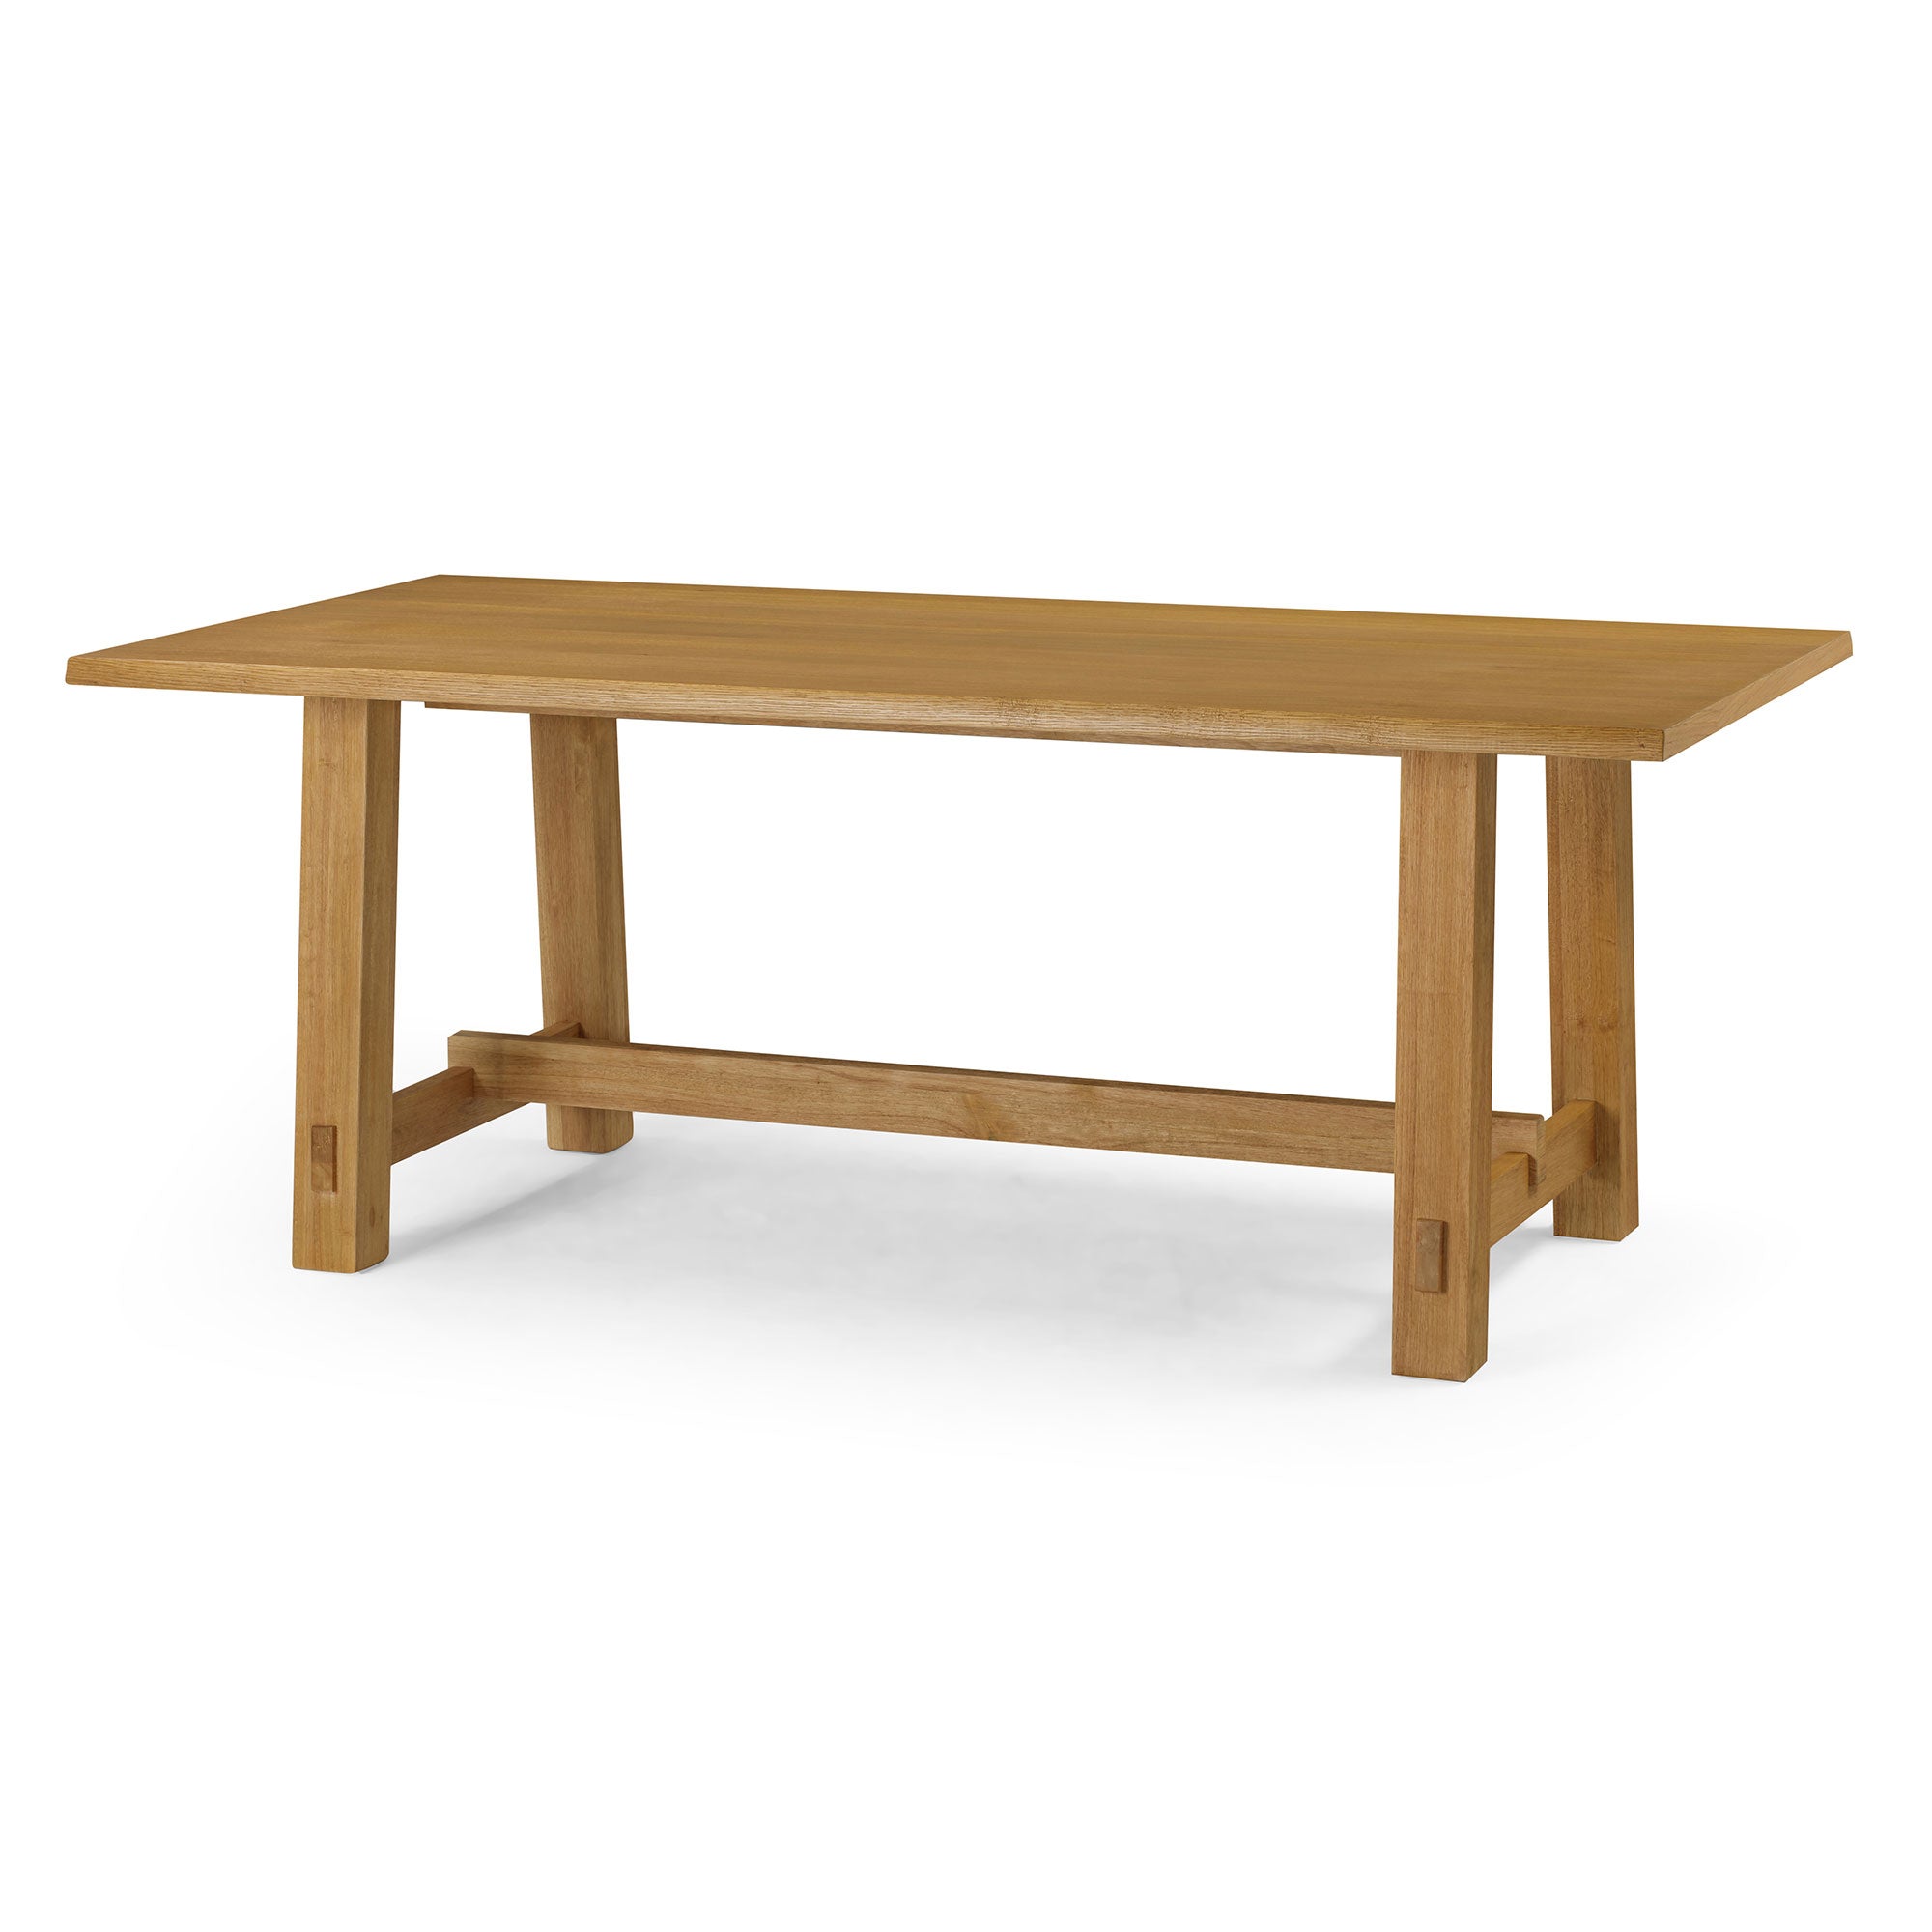 Maven-Lane-Yves-Rectangular-Wooden-Dining-Table-in-Weathered-Natural-Finish-Kitchen-&-Dining-Room-Tables